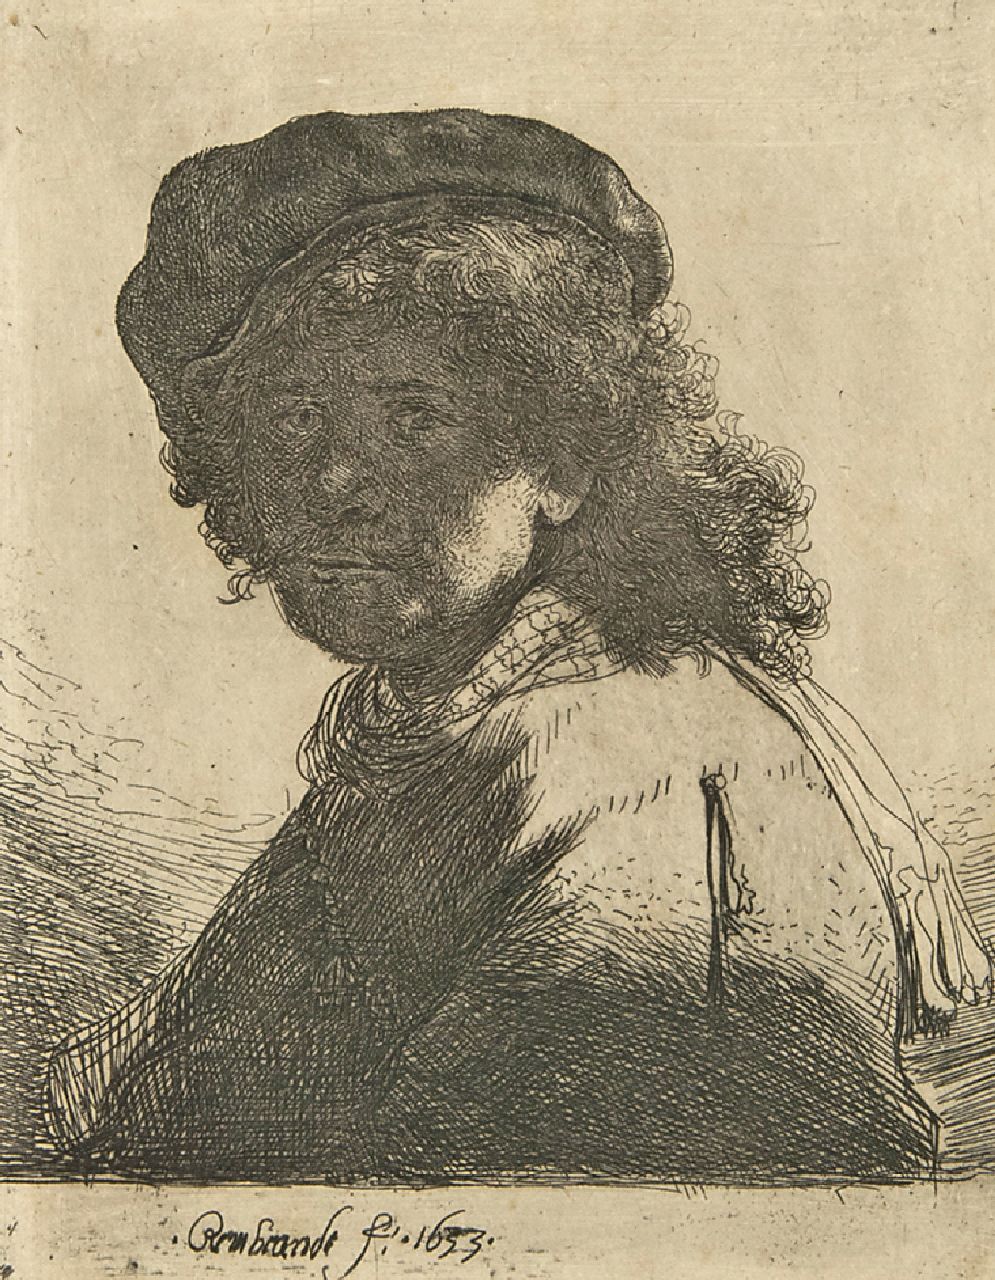 Rembrandt (Rembrandt Harmensz. van Rijn)   | Rembrandt (Rembrandt Harmensz. van Rijn), Self-portrait in a velvet cap and scarf, etching on paper 13.2 x 10.3 cm, signed l.c. in the plate and dated 1633 in the plate